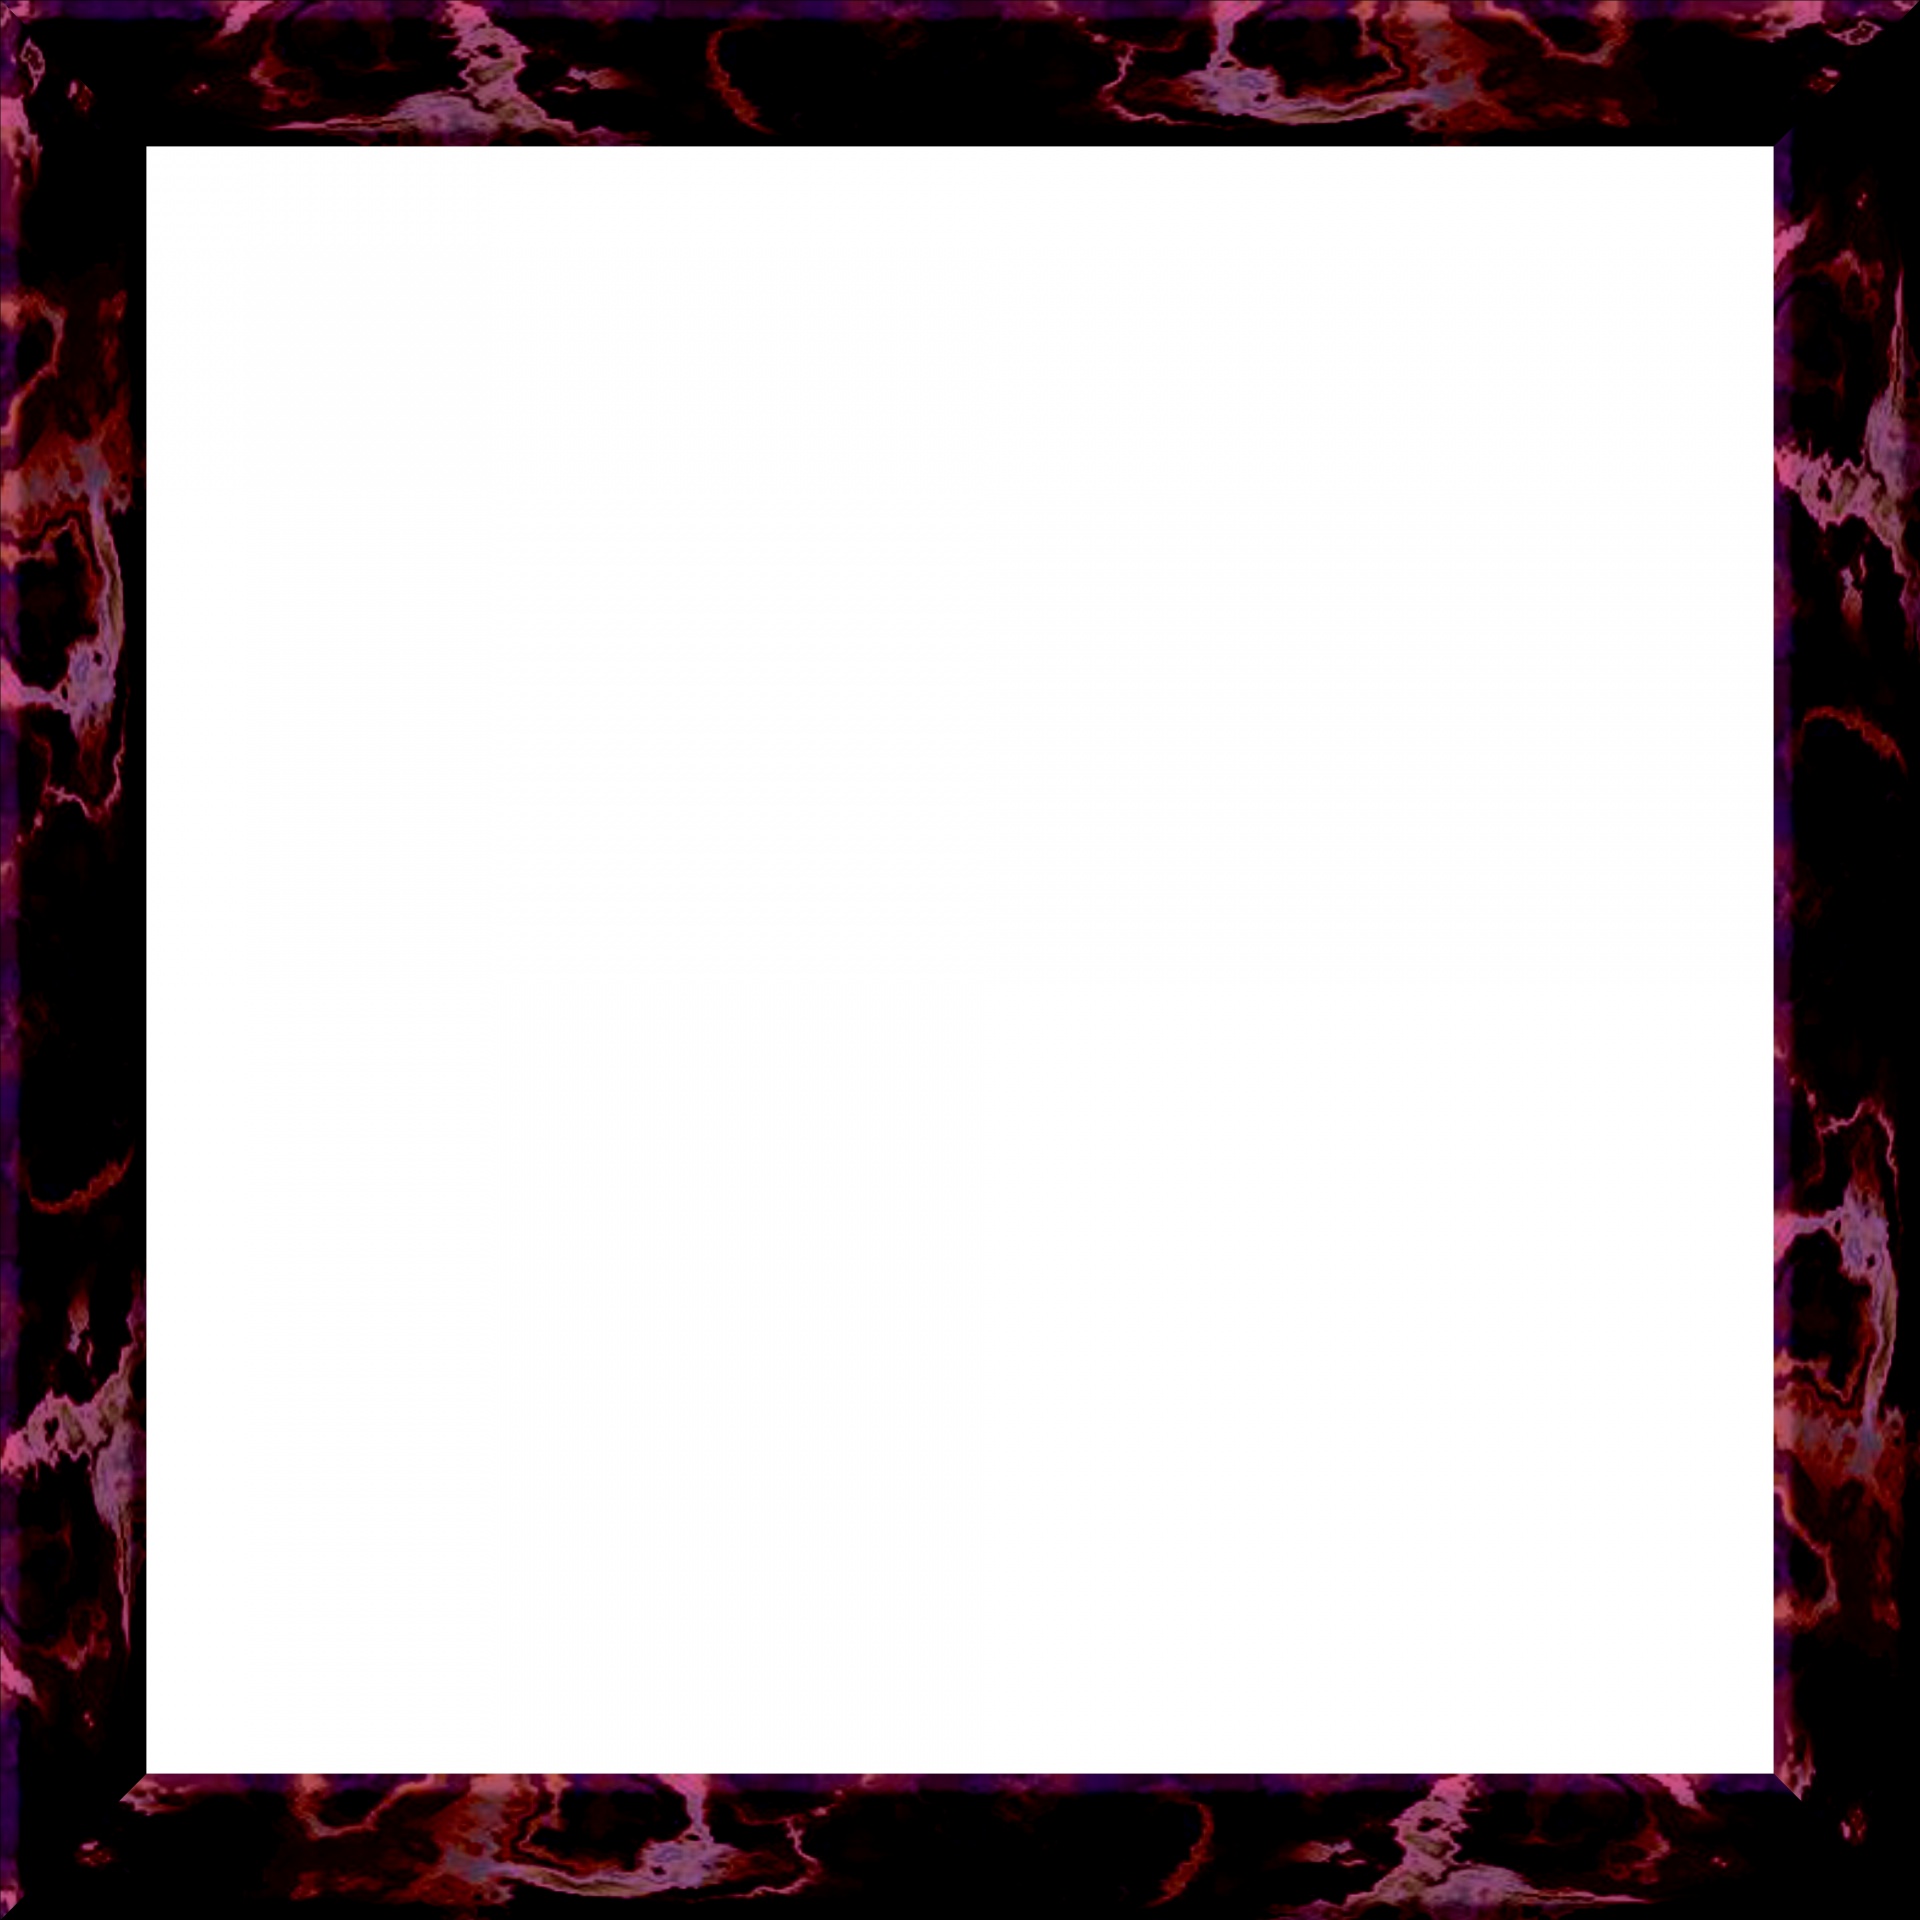 Download free photo of Beautiful,dark,pink,frame,isolated - from 